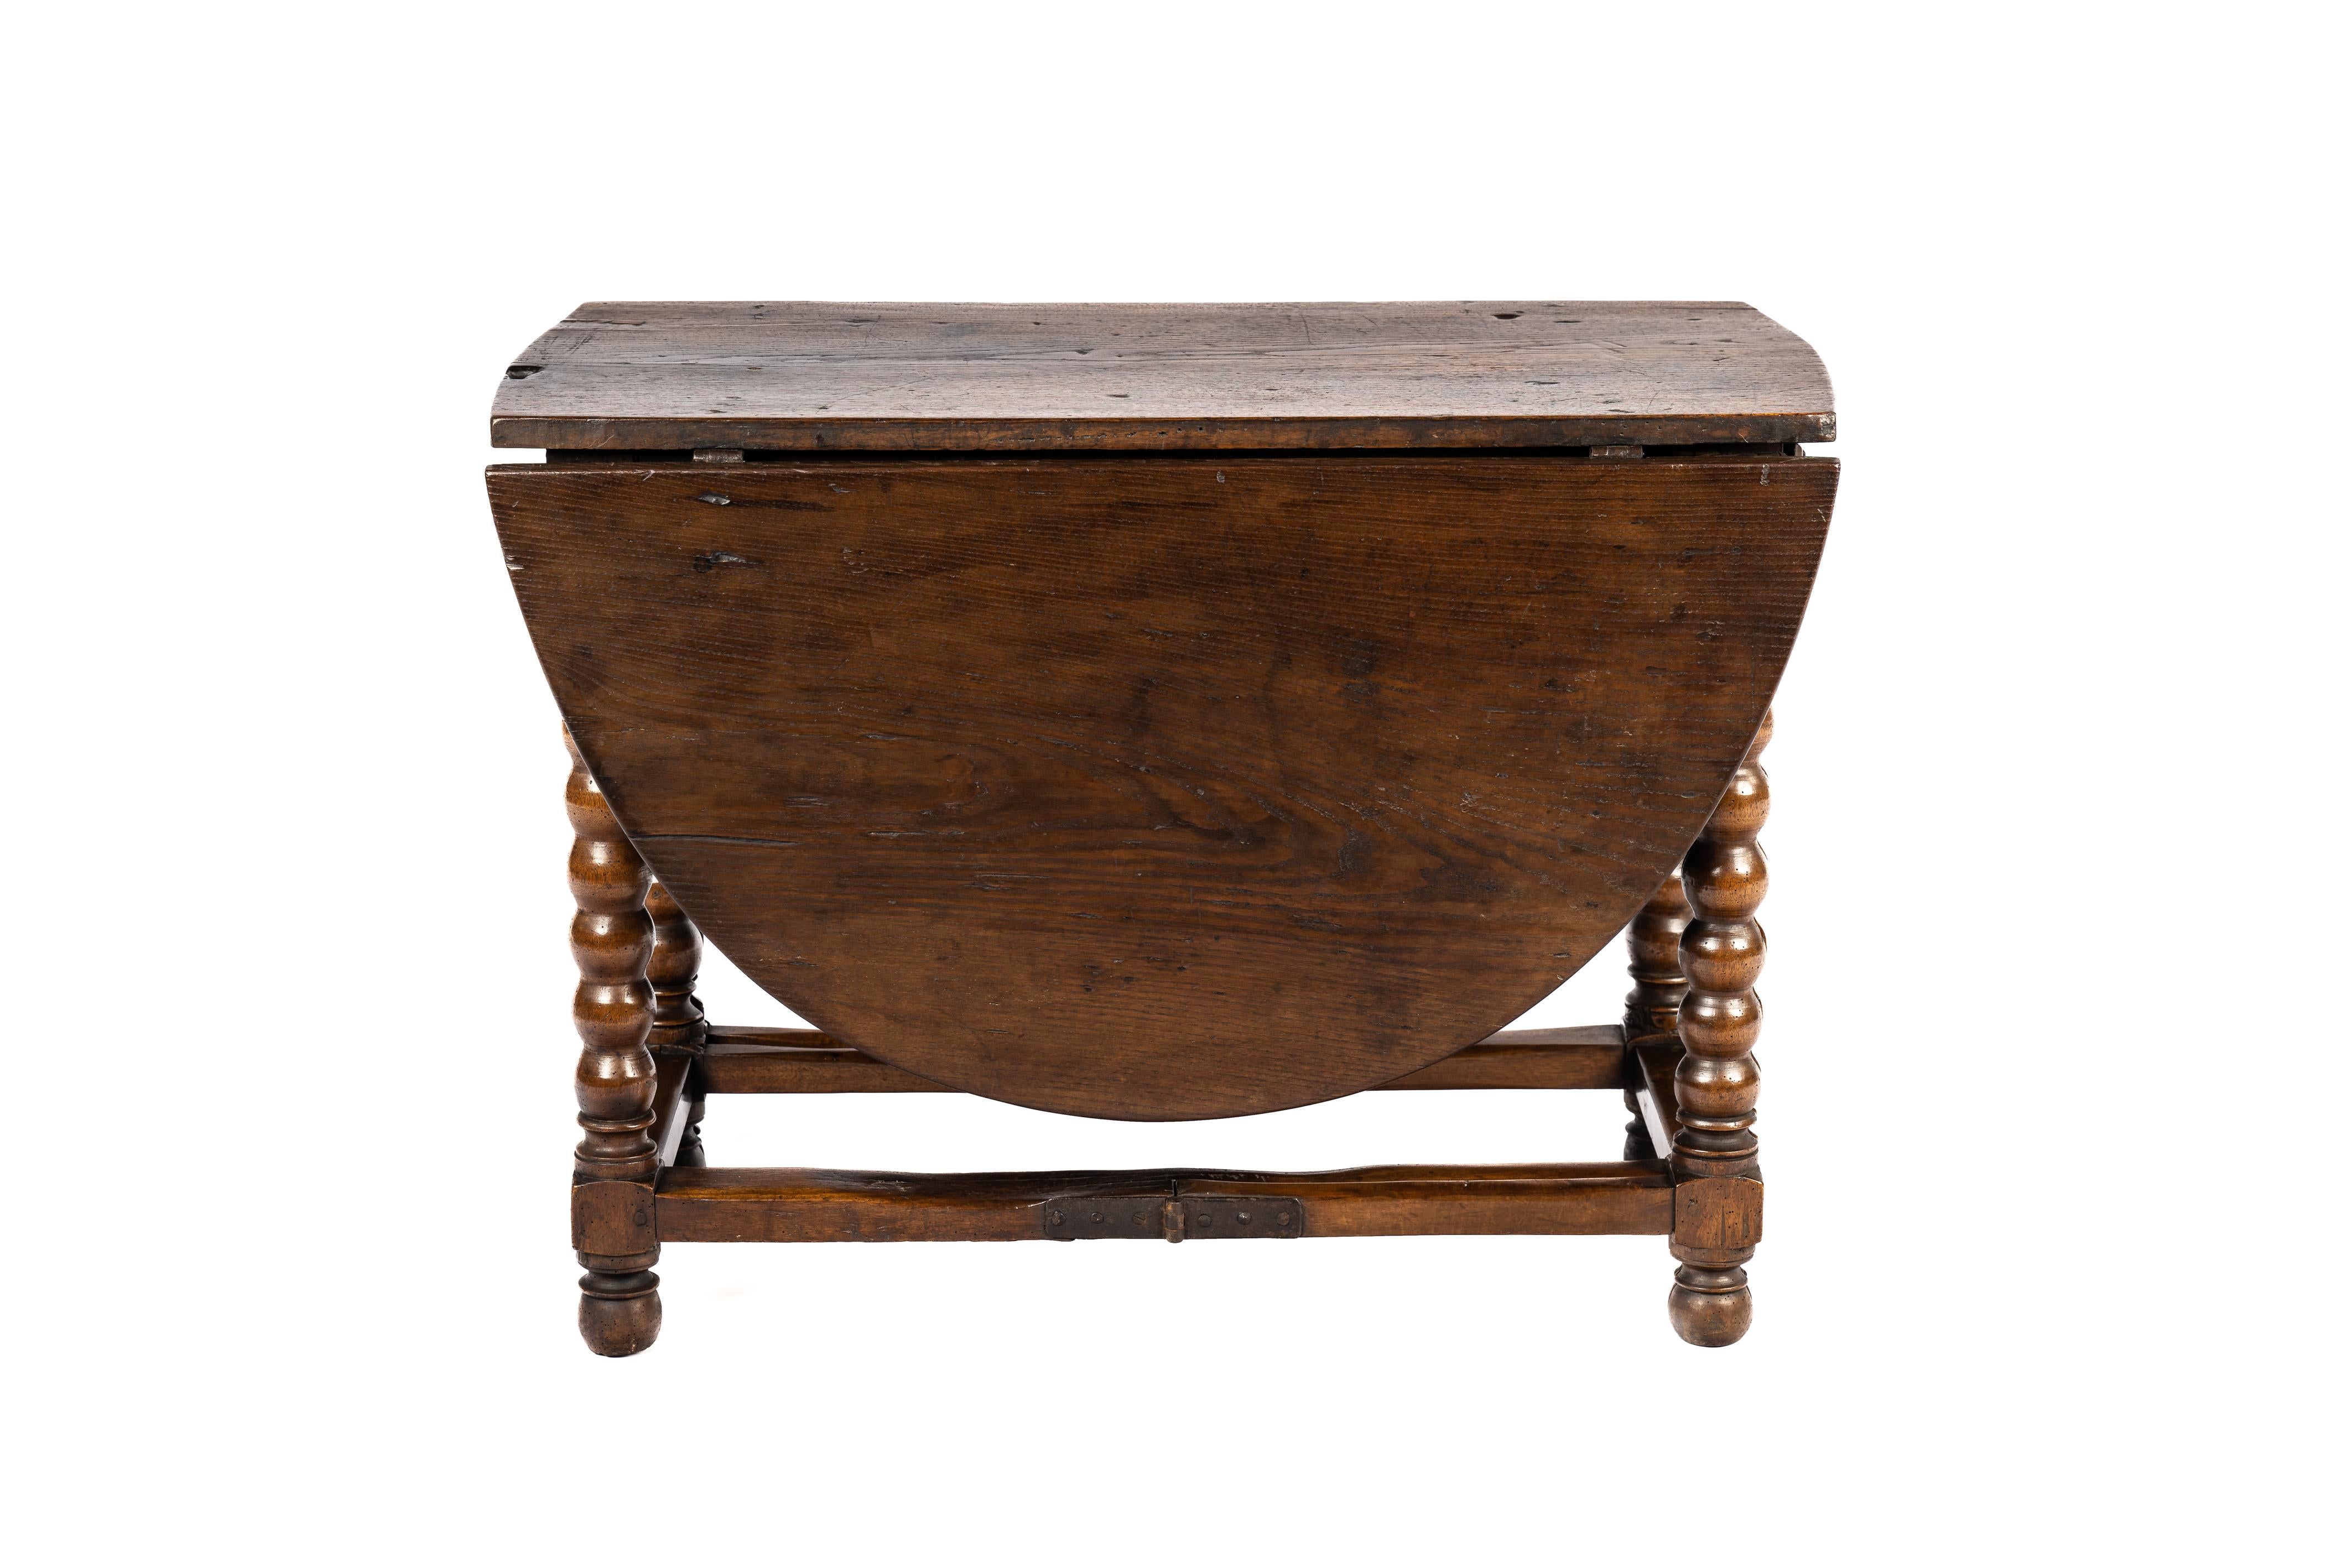 On offer here, is an exquisite piece of history—an antique gateleg or dropleaf table originating from Spain, dating back to the late 17th century, circa 1680. This remarkable table is crafted from solid chestnut wood, boasting a stunning grain